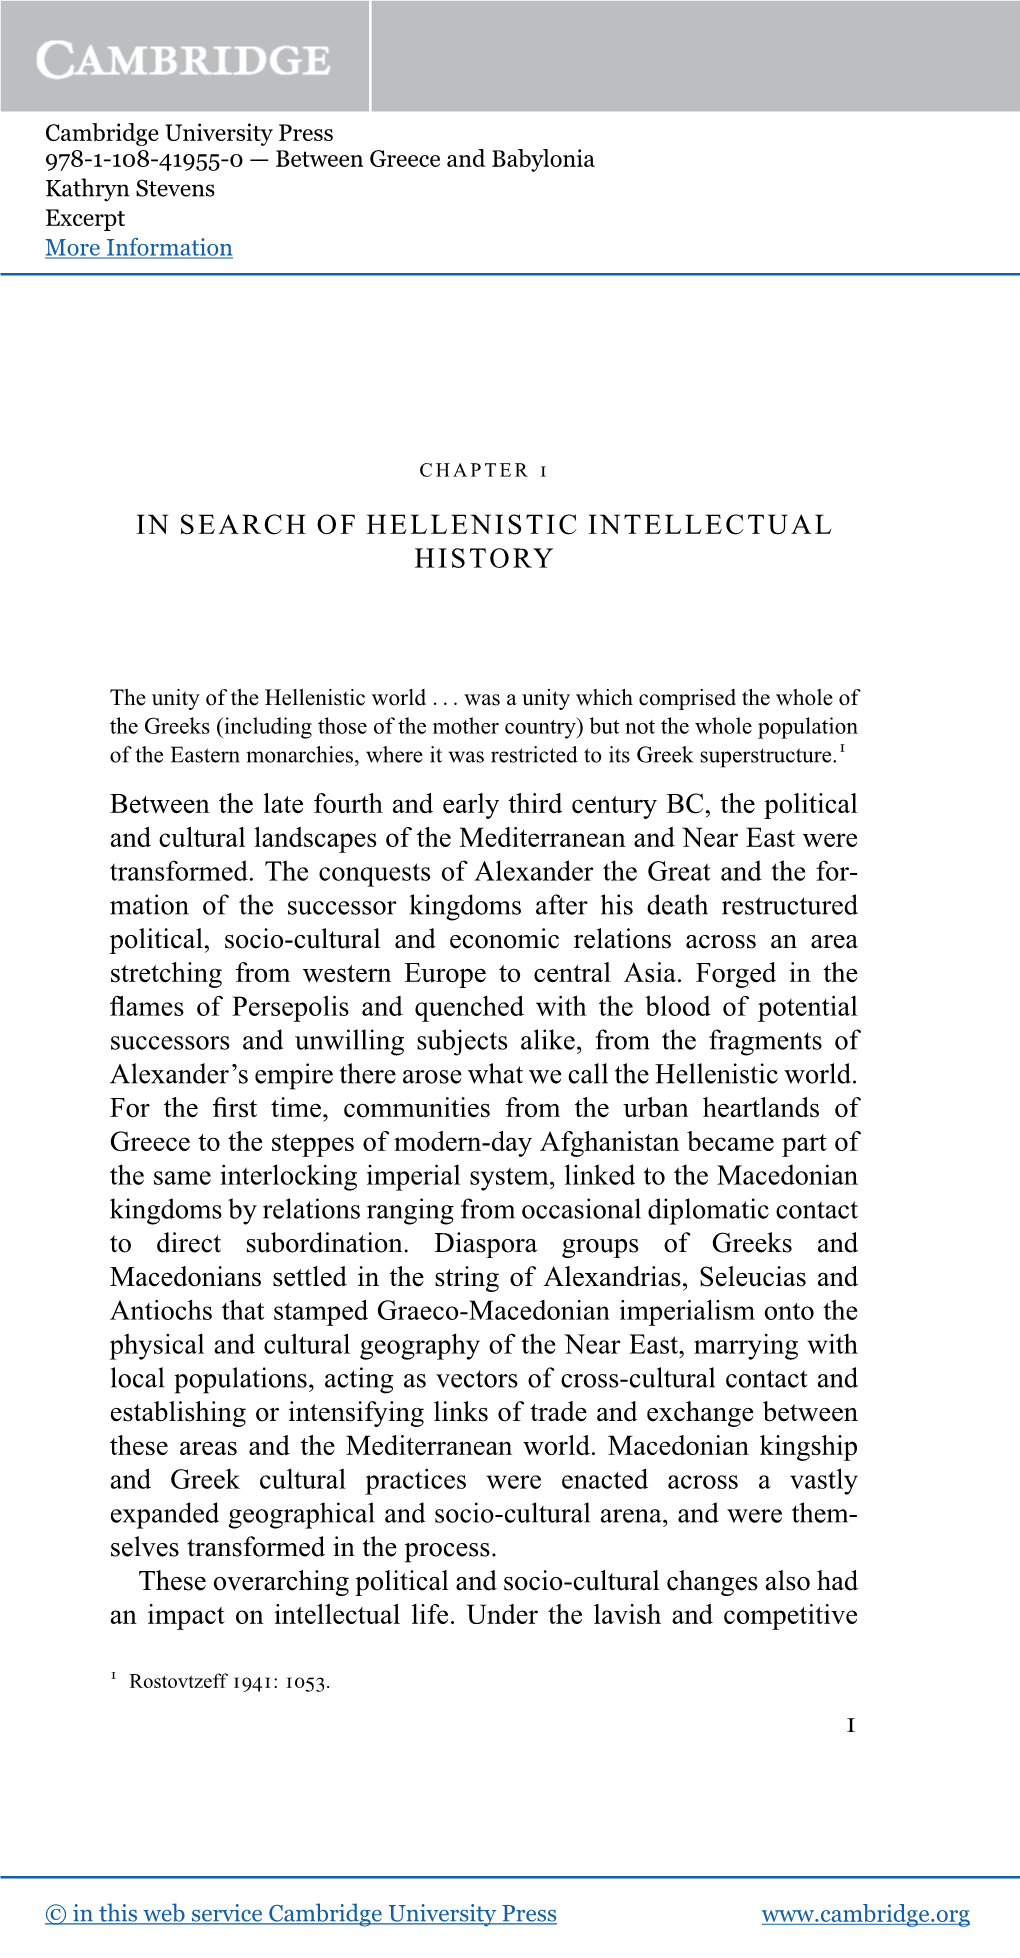 In Search of Hellenistic Intellectual History